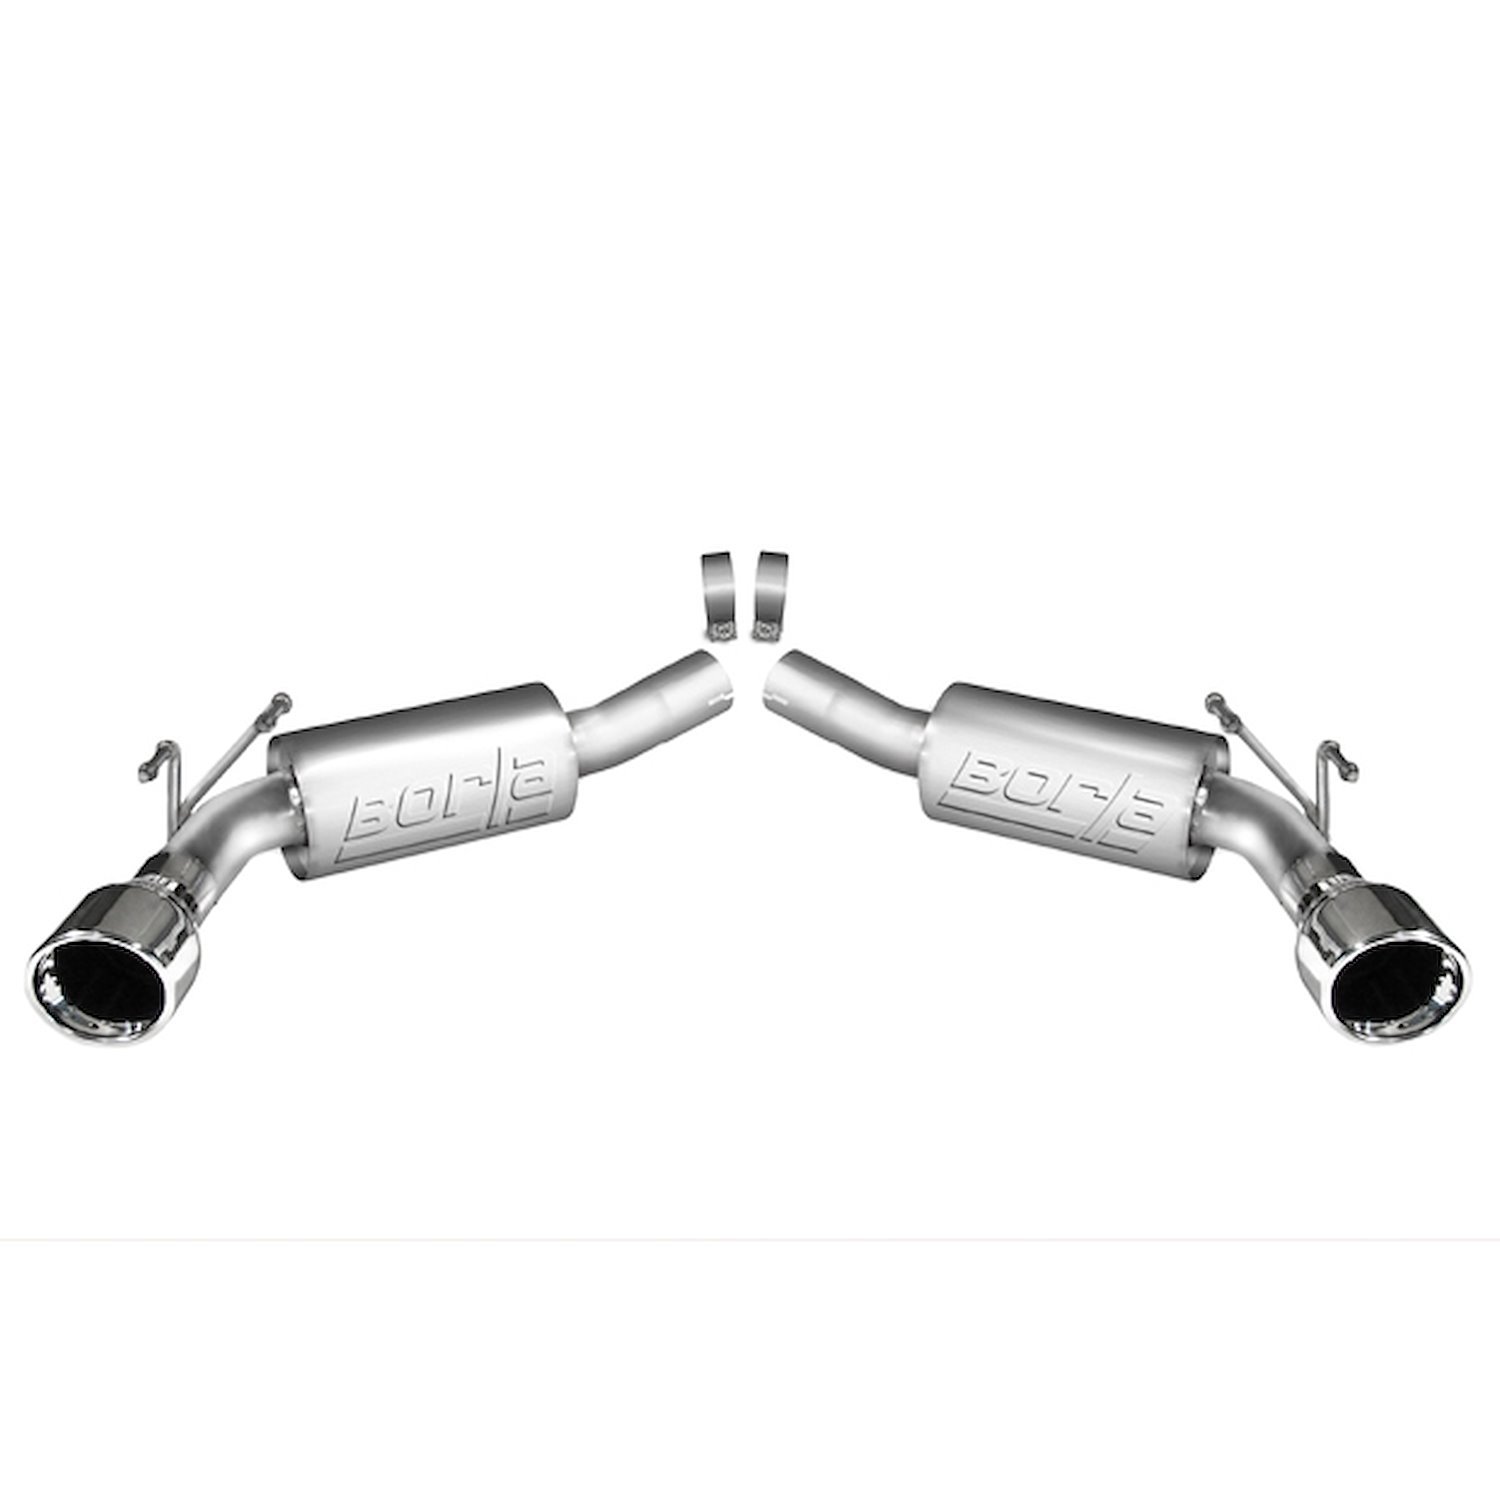 Axle-Back Exhaust System 2010-2013 Camaro SS 6.2L V8